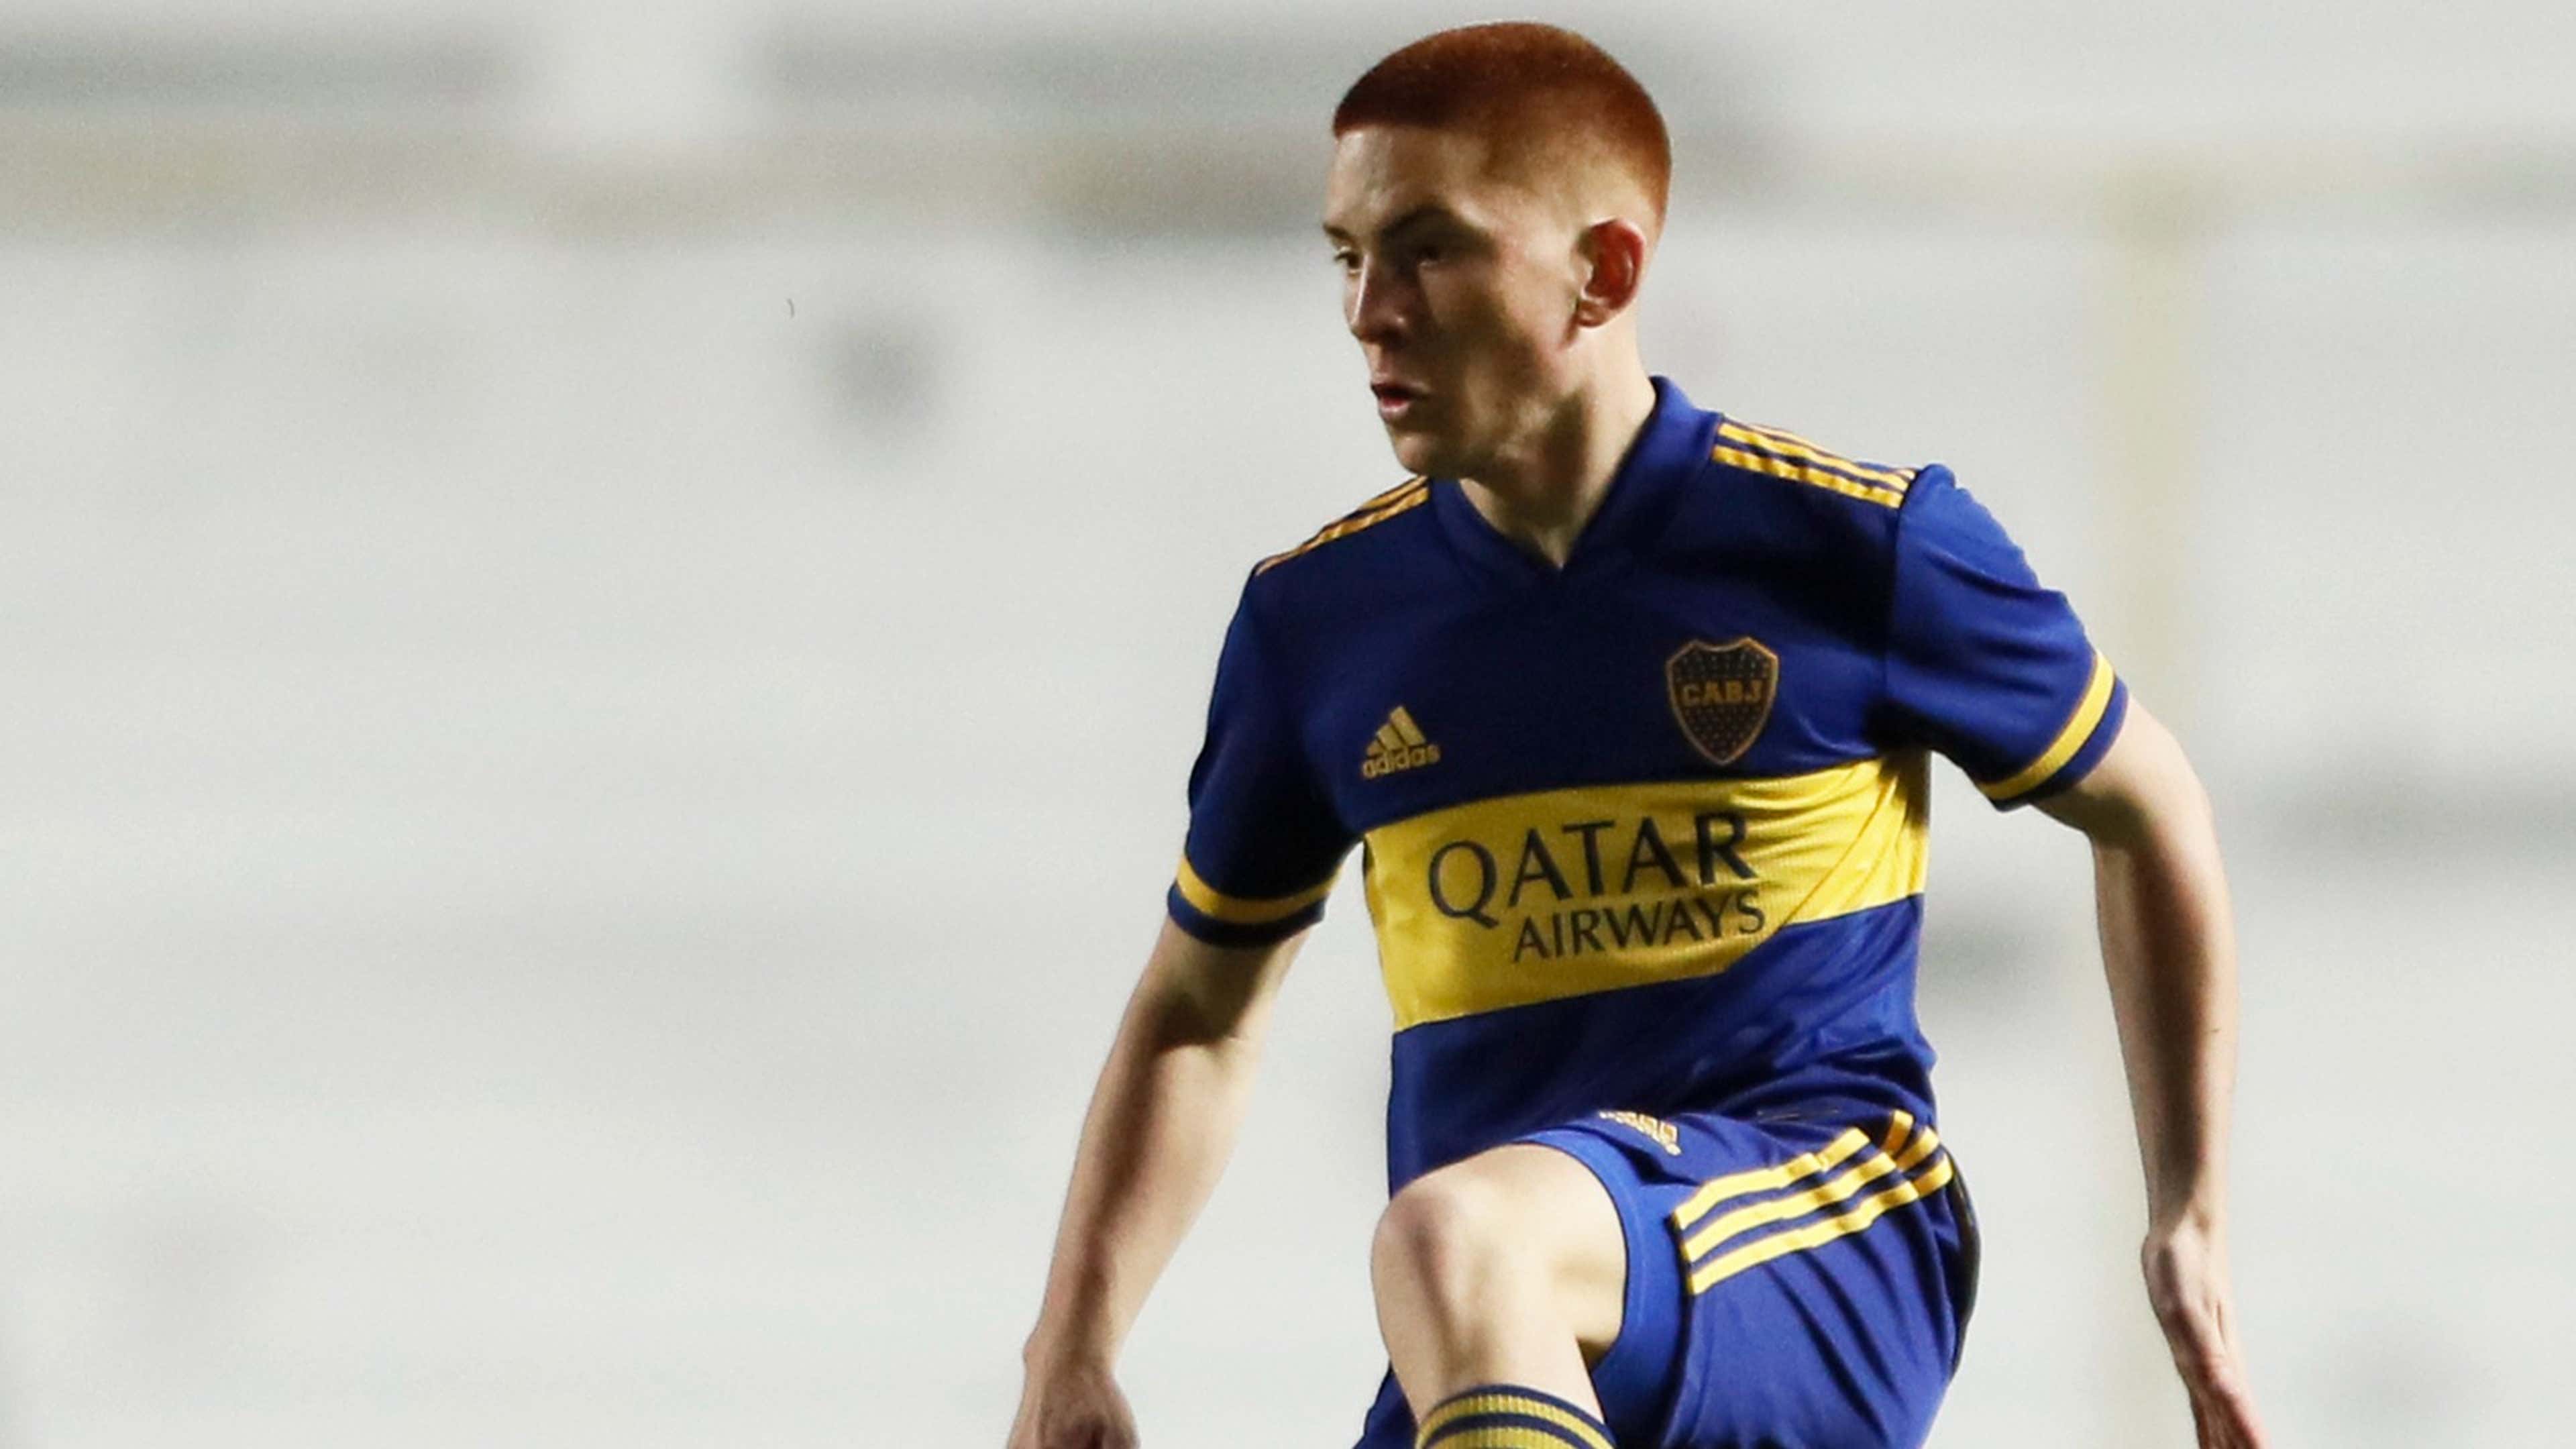 Valentin Barco: Why Man City and Liverpool are targeting the teenage Boca  Juniors left-back who moonlights as an attacking playmaker